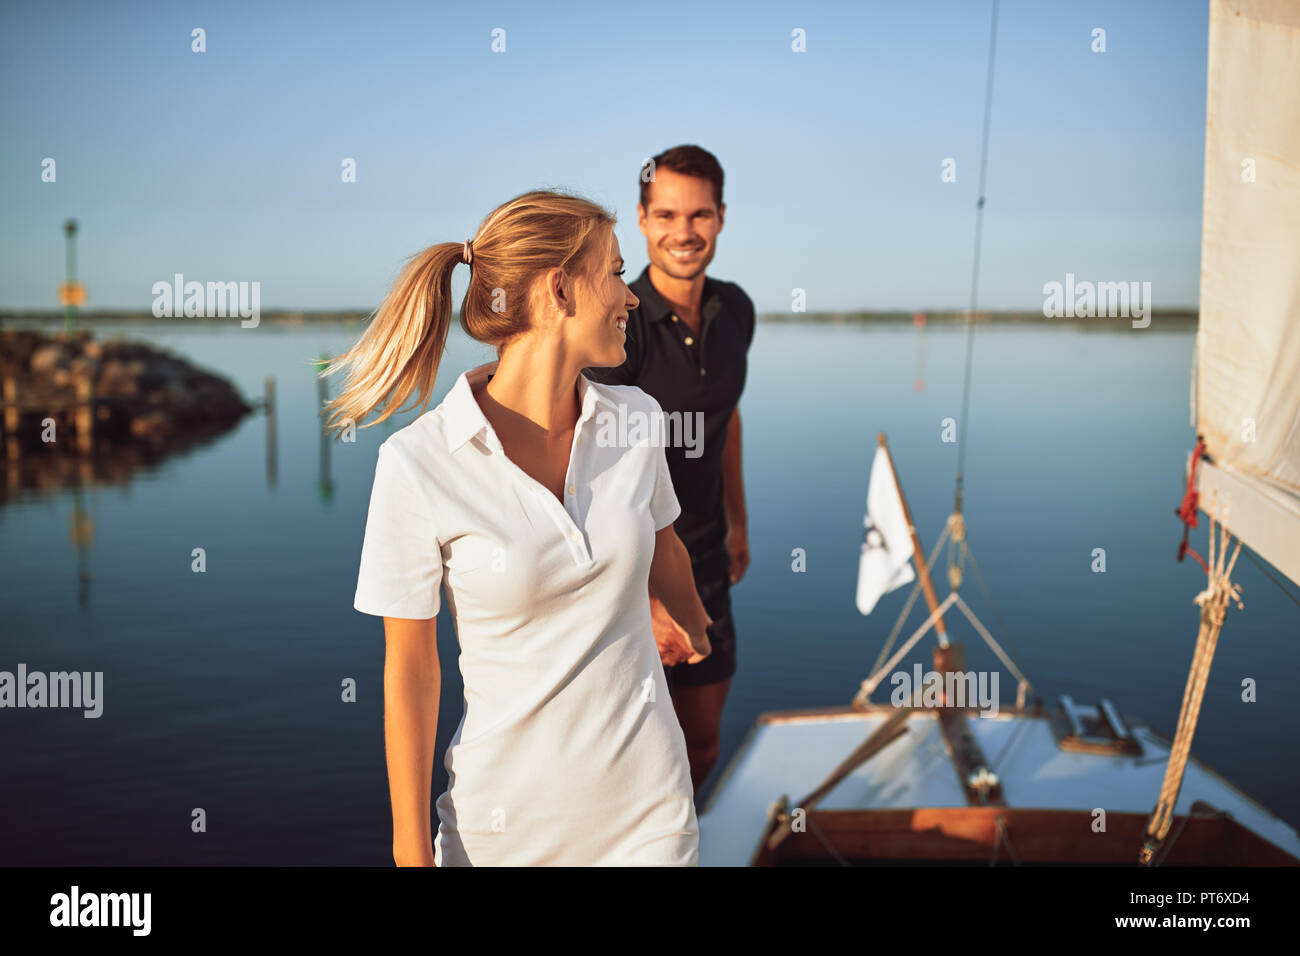 Young woman leading her husband by the hand on the deck of their yacht while enjoying a sunny day sailing together Stock Photo